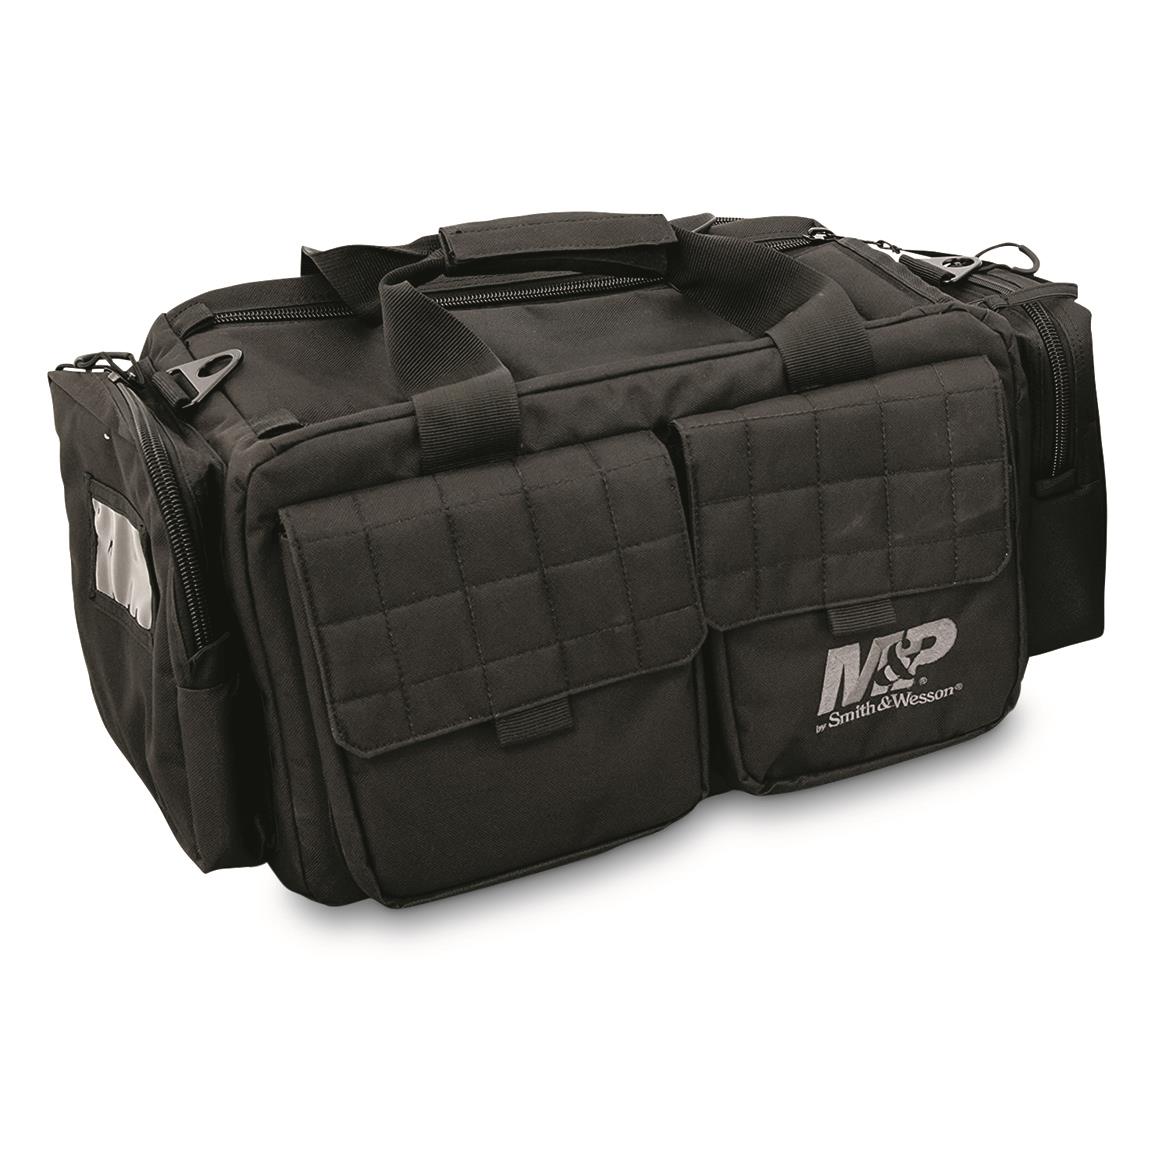 Smith & Wesson M&P Officer Tactical Range Bag